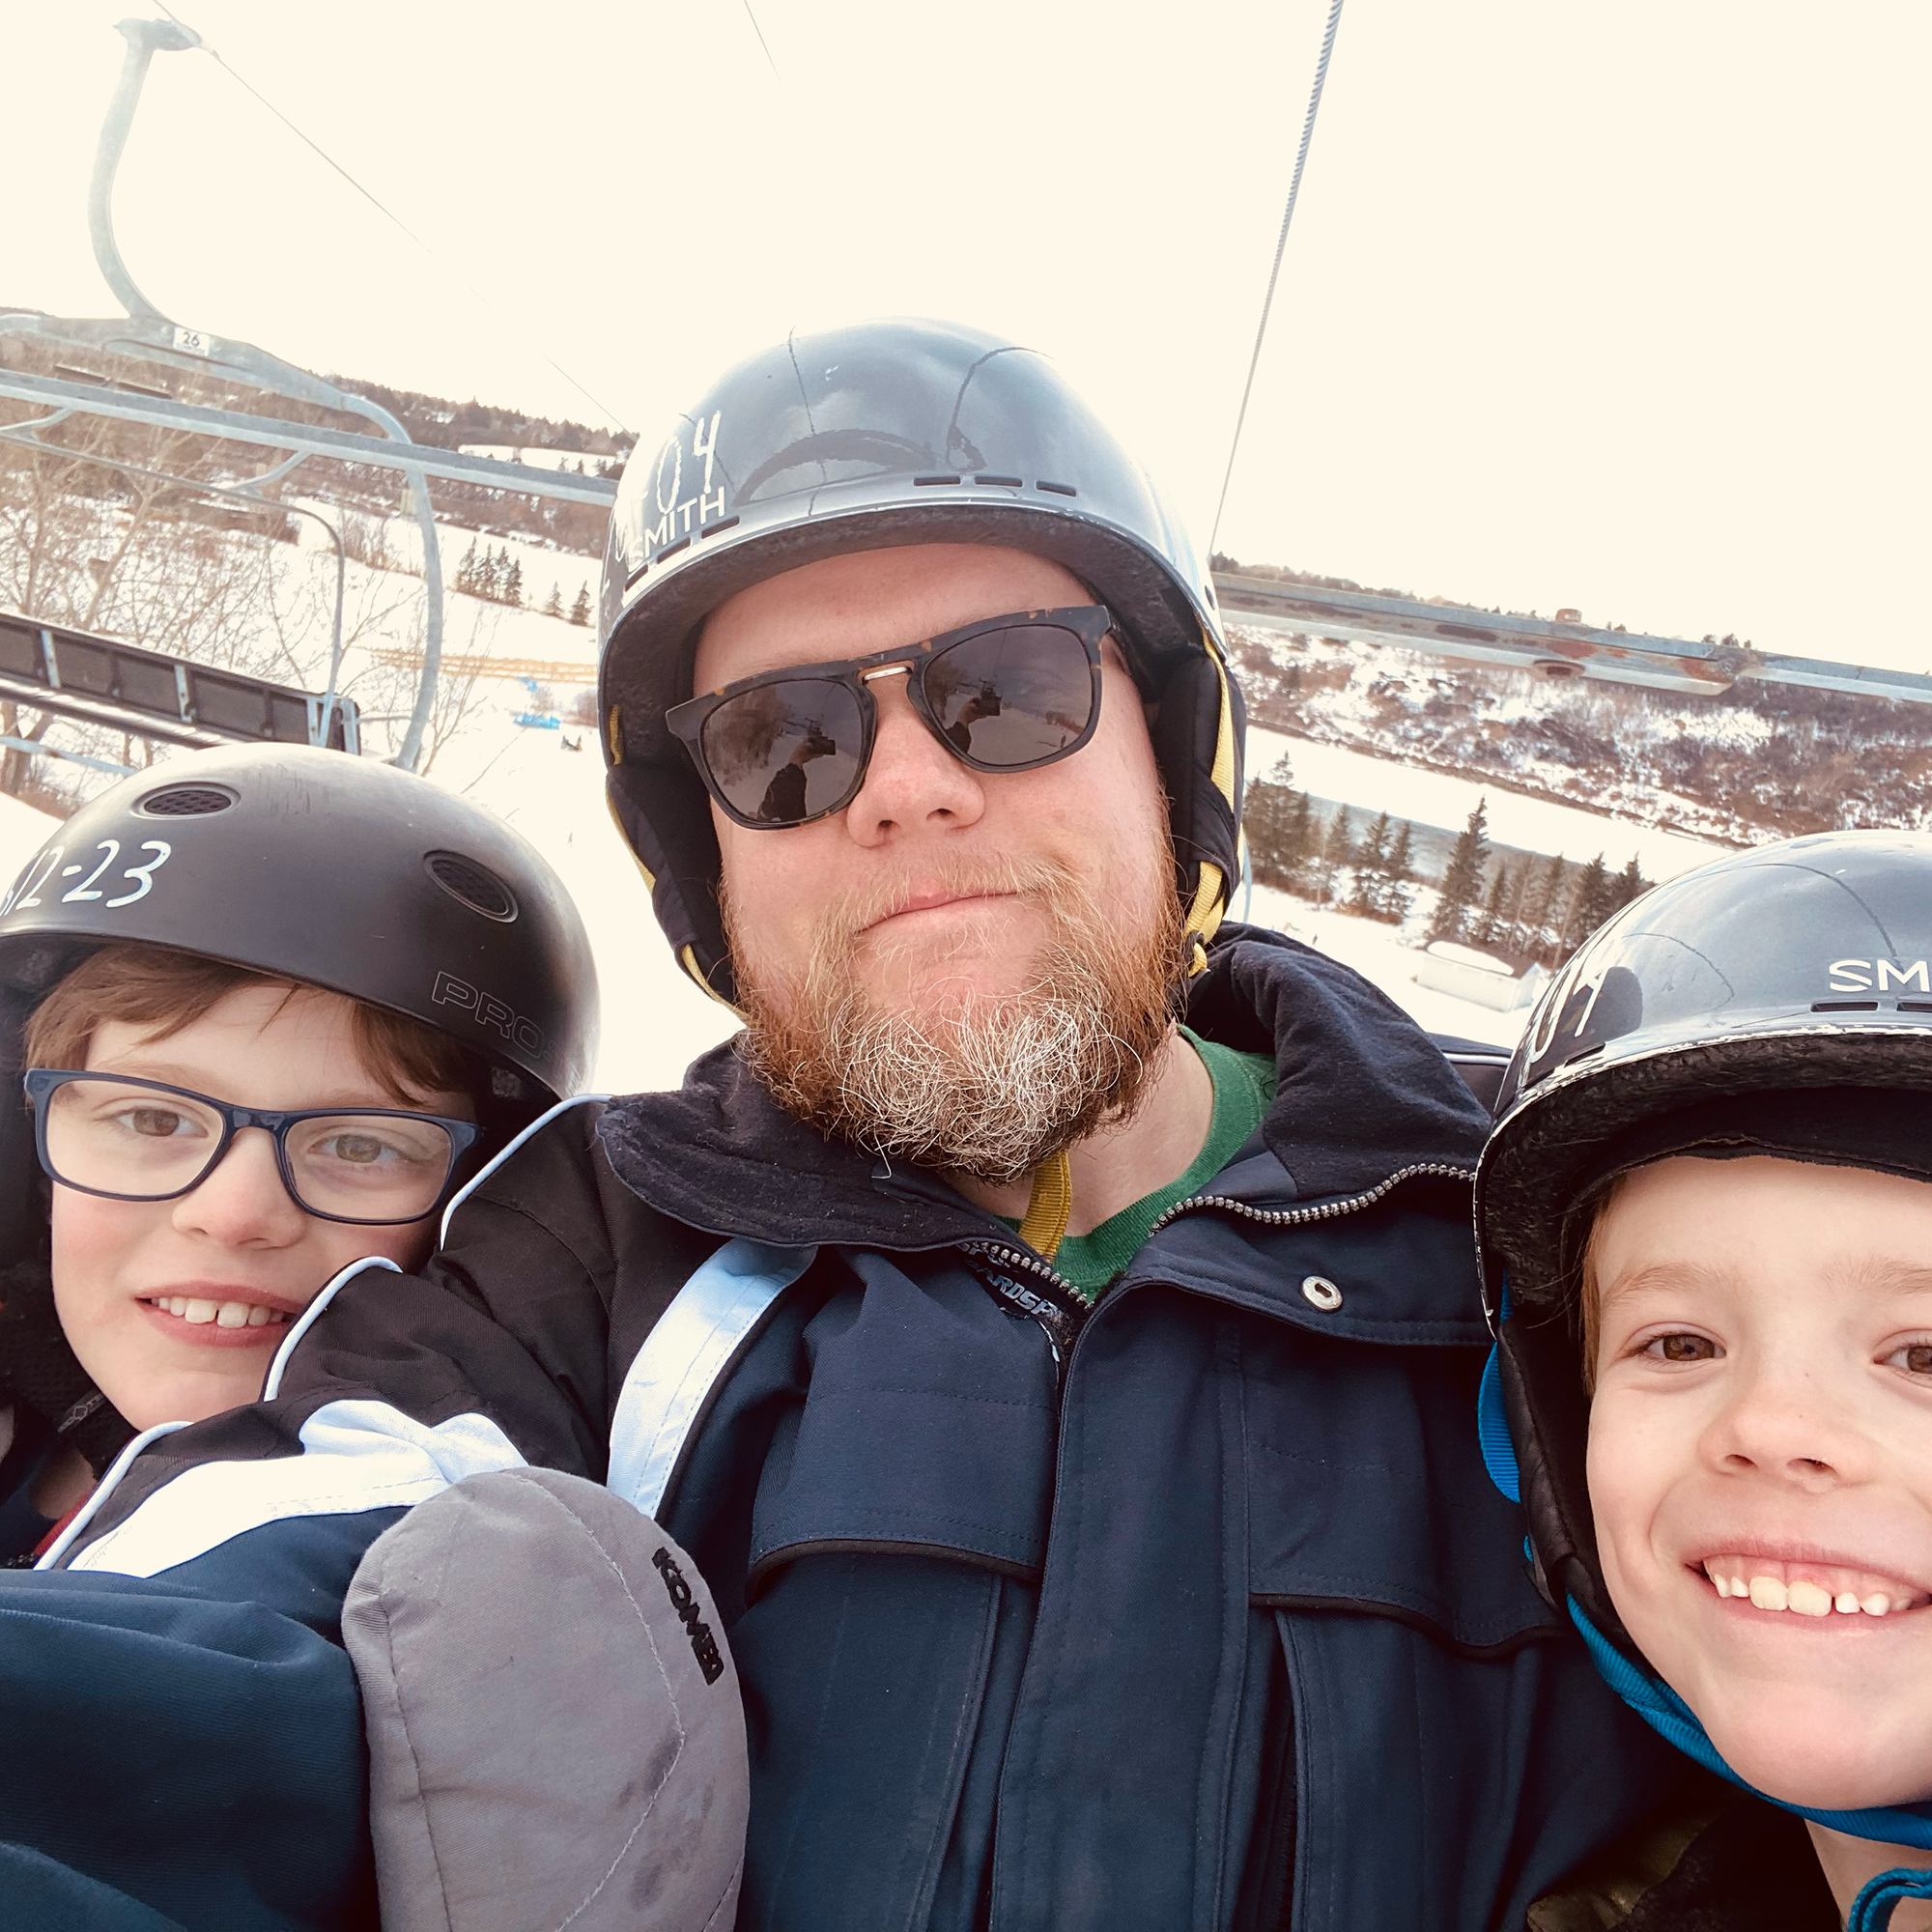 Selfie of Jeff on a ski hill with his two sons